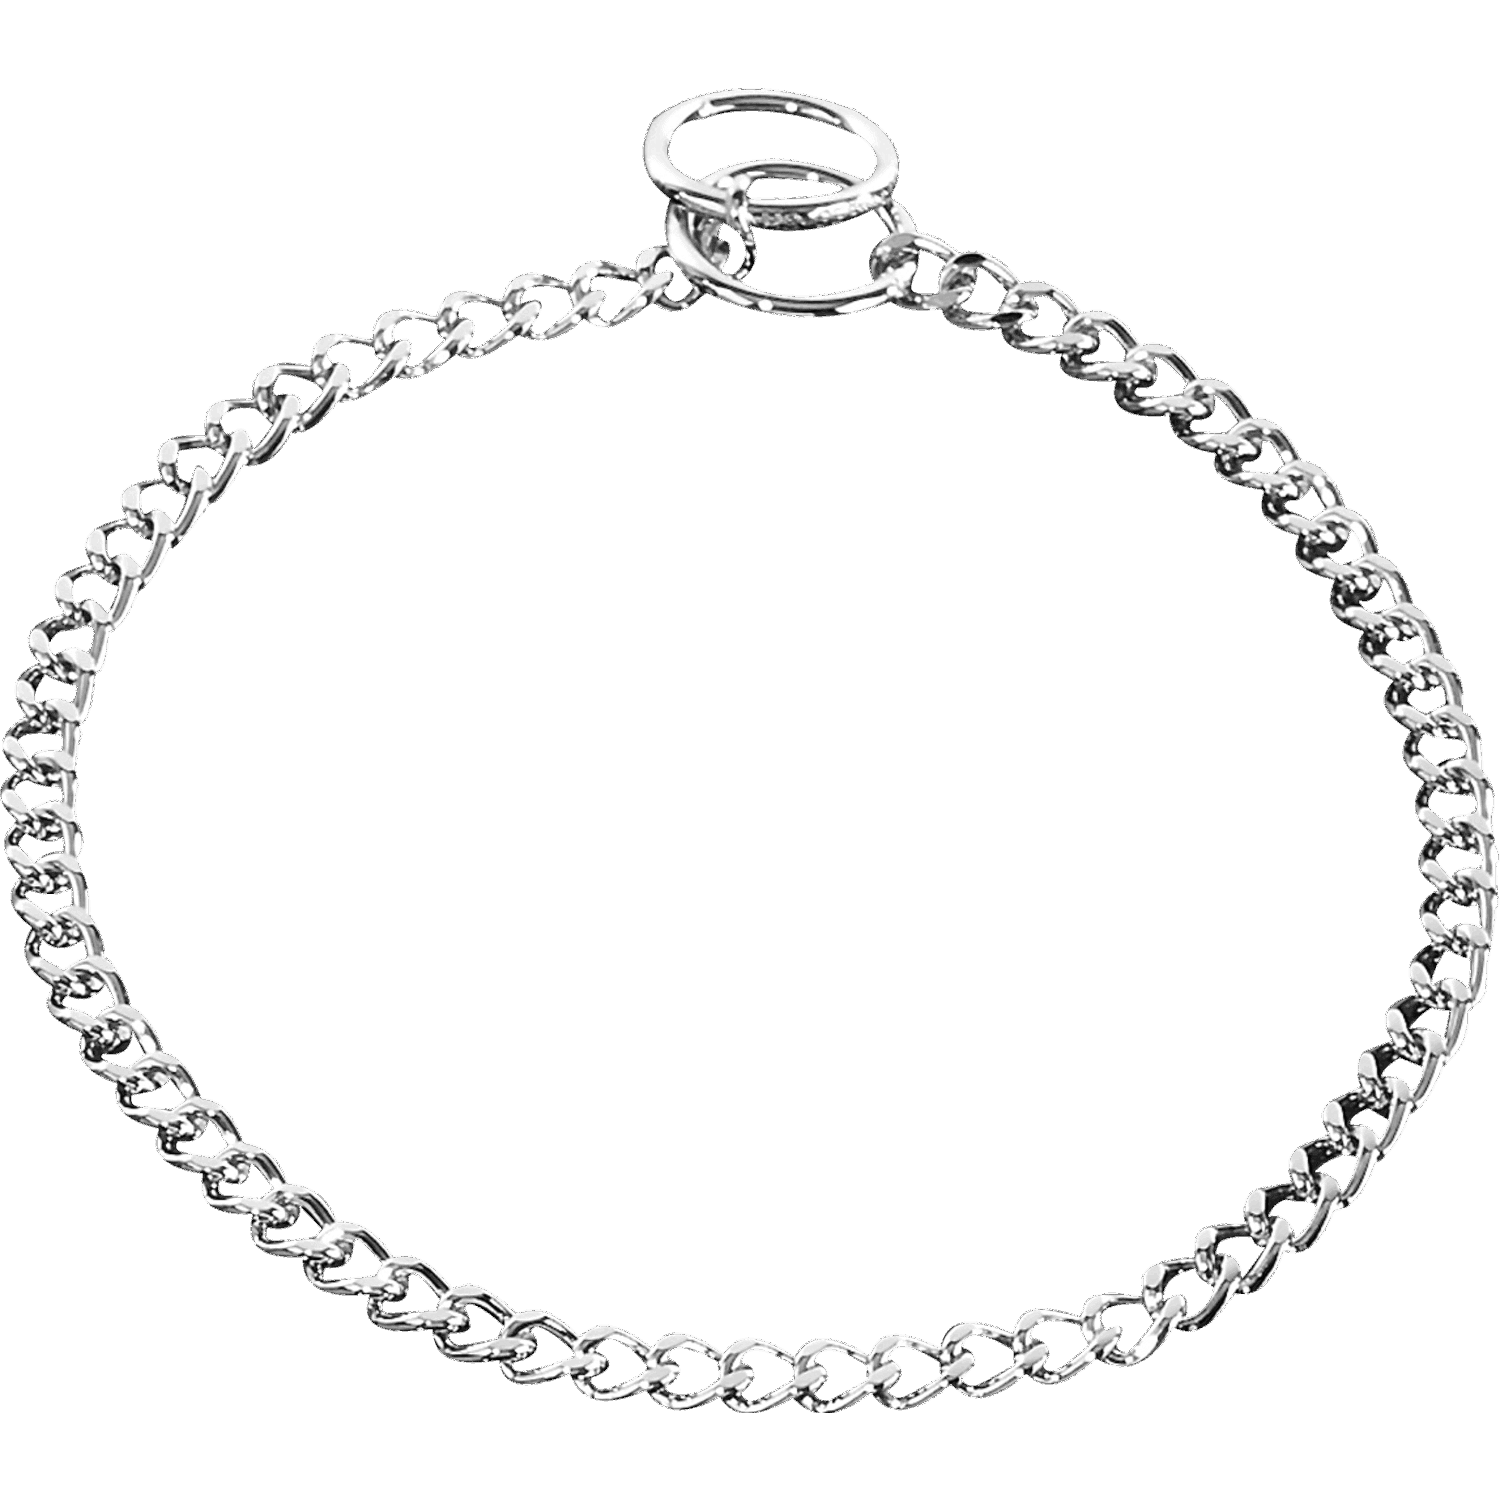 Flat Chain Link Collar (Steel Chrome-Plated) - 2mm